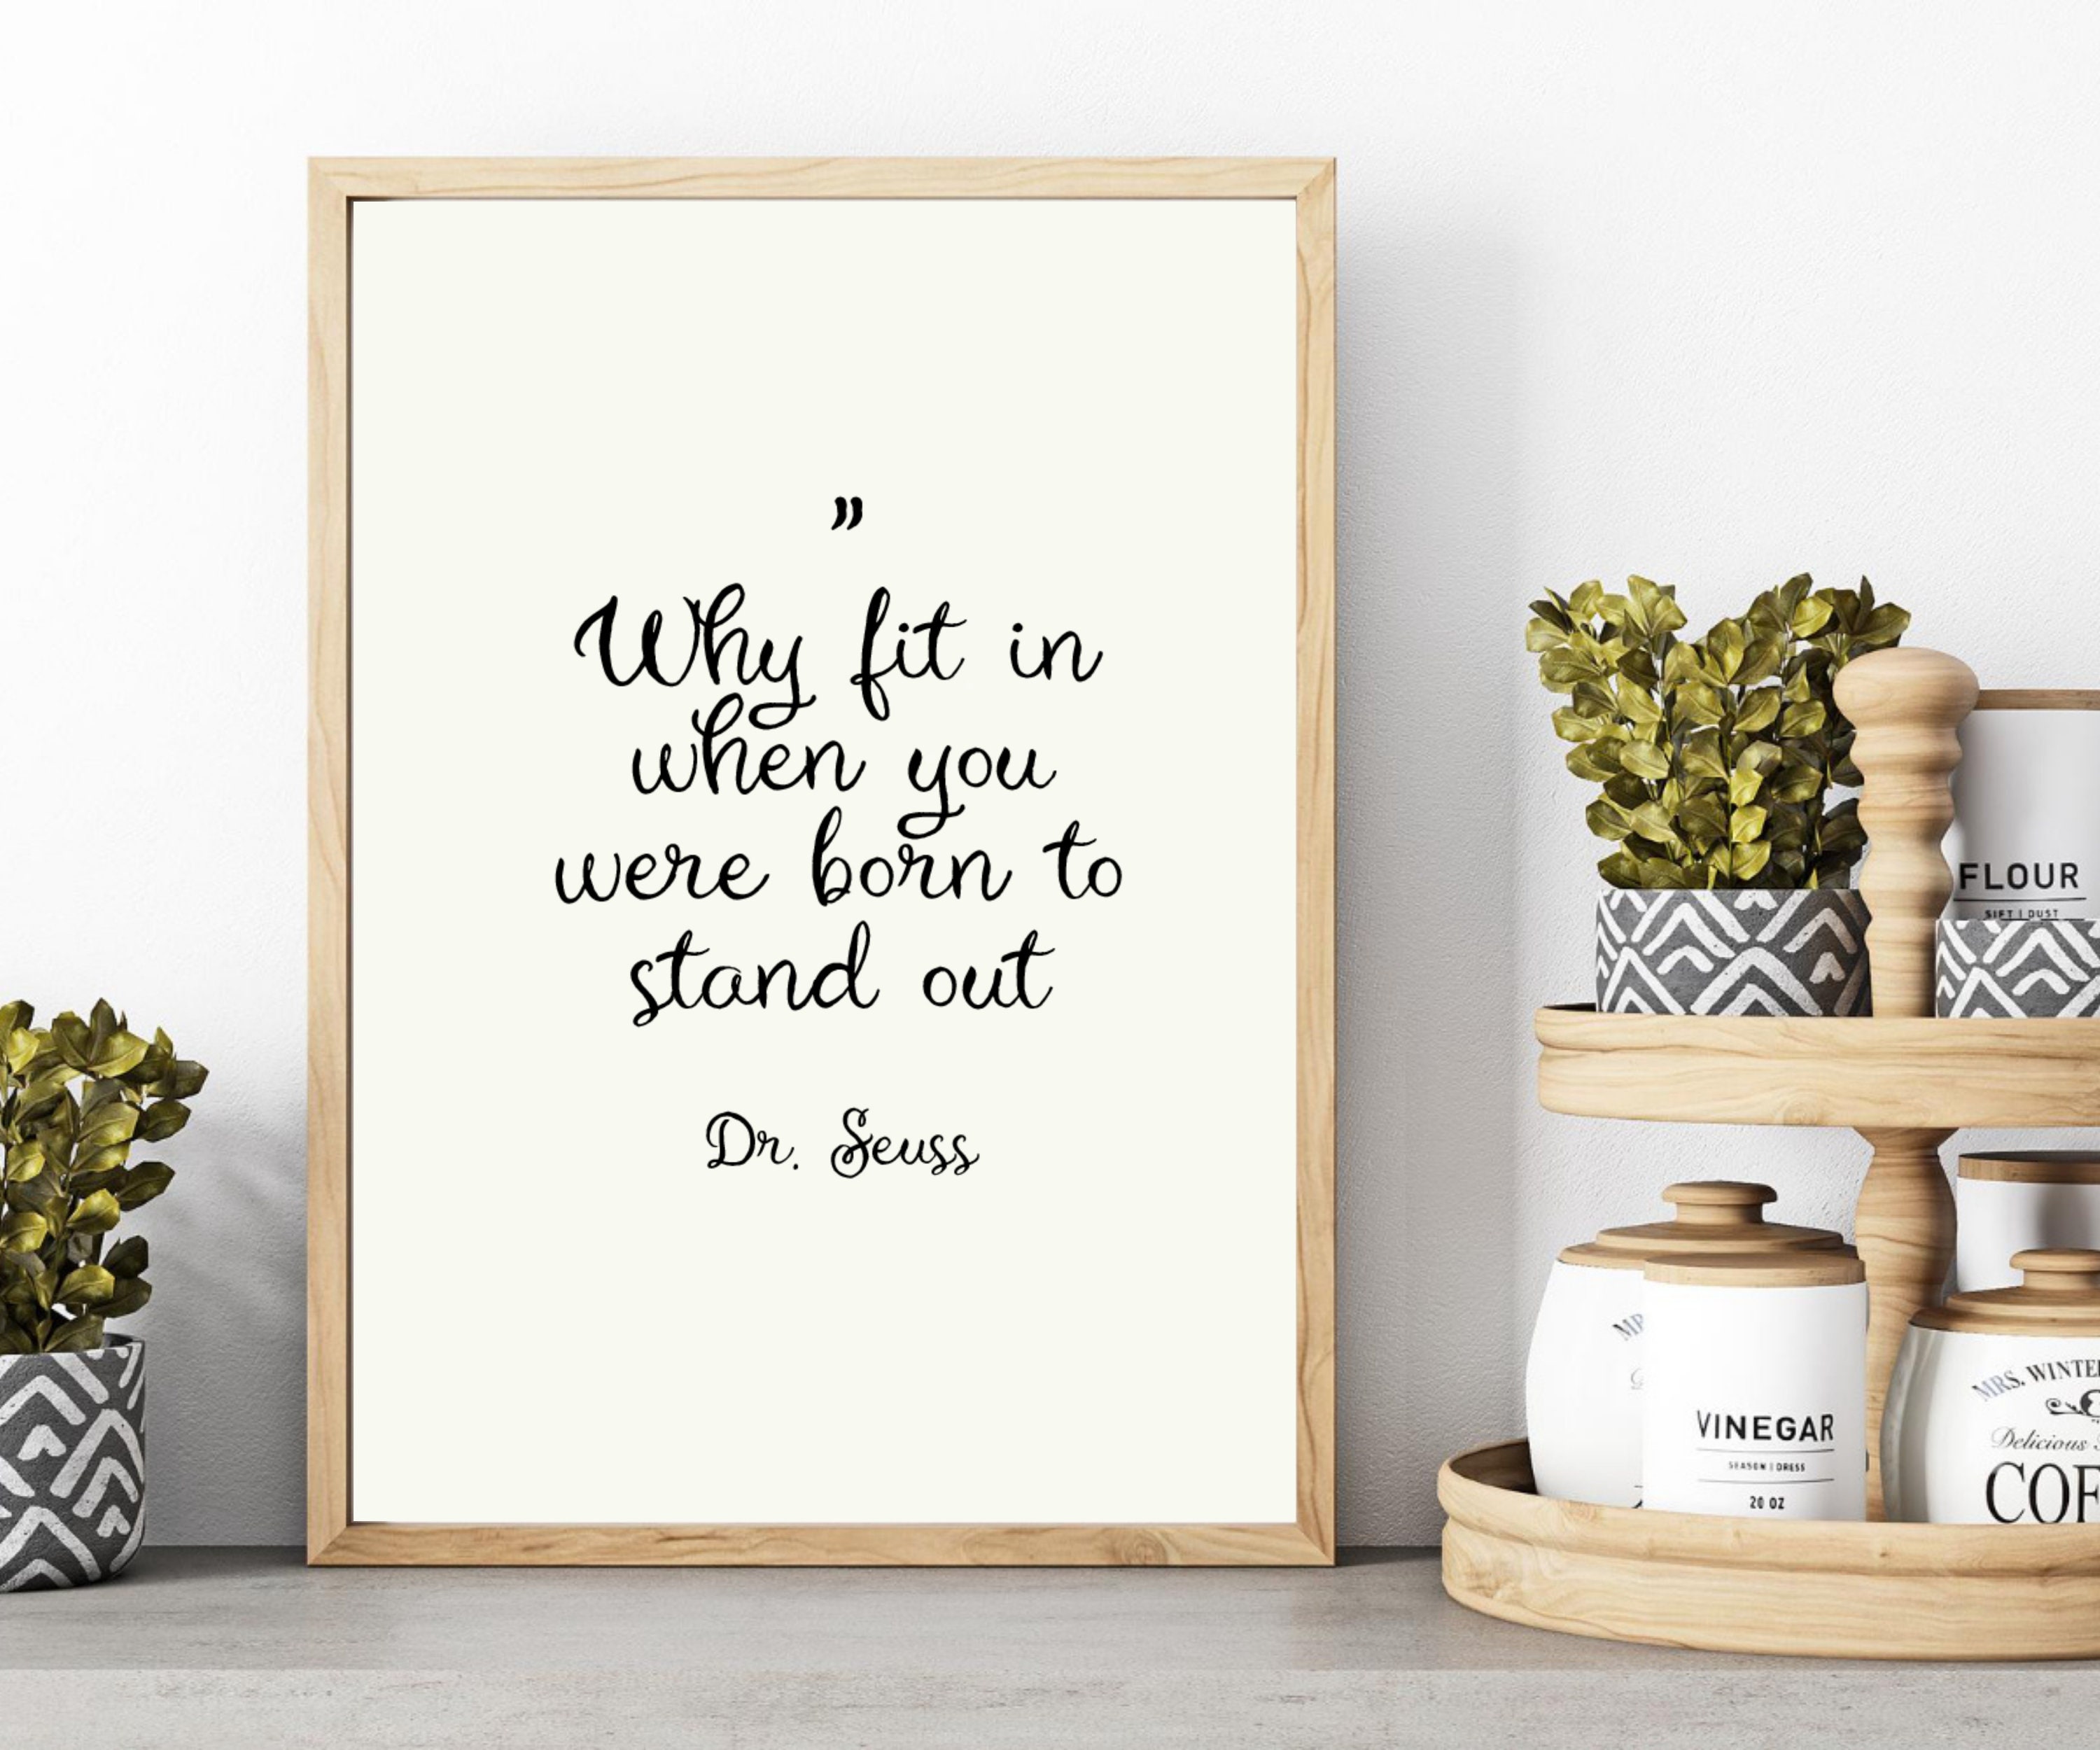 Home Décor Quotes About Life Brainy Quote Instant Download Dr Seuss Quotes  Playroom decor White And Black Art Success Poster Inspiring Wall Art Wall  Hangings etna.com.pe